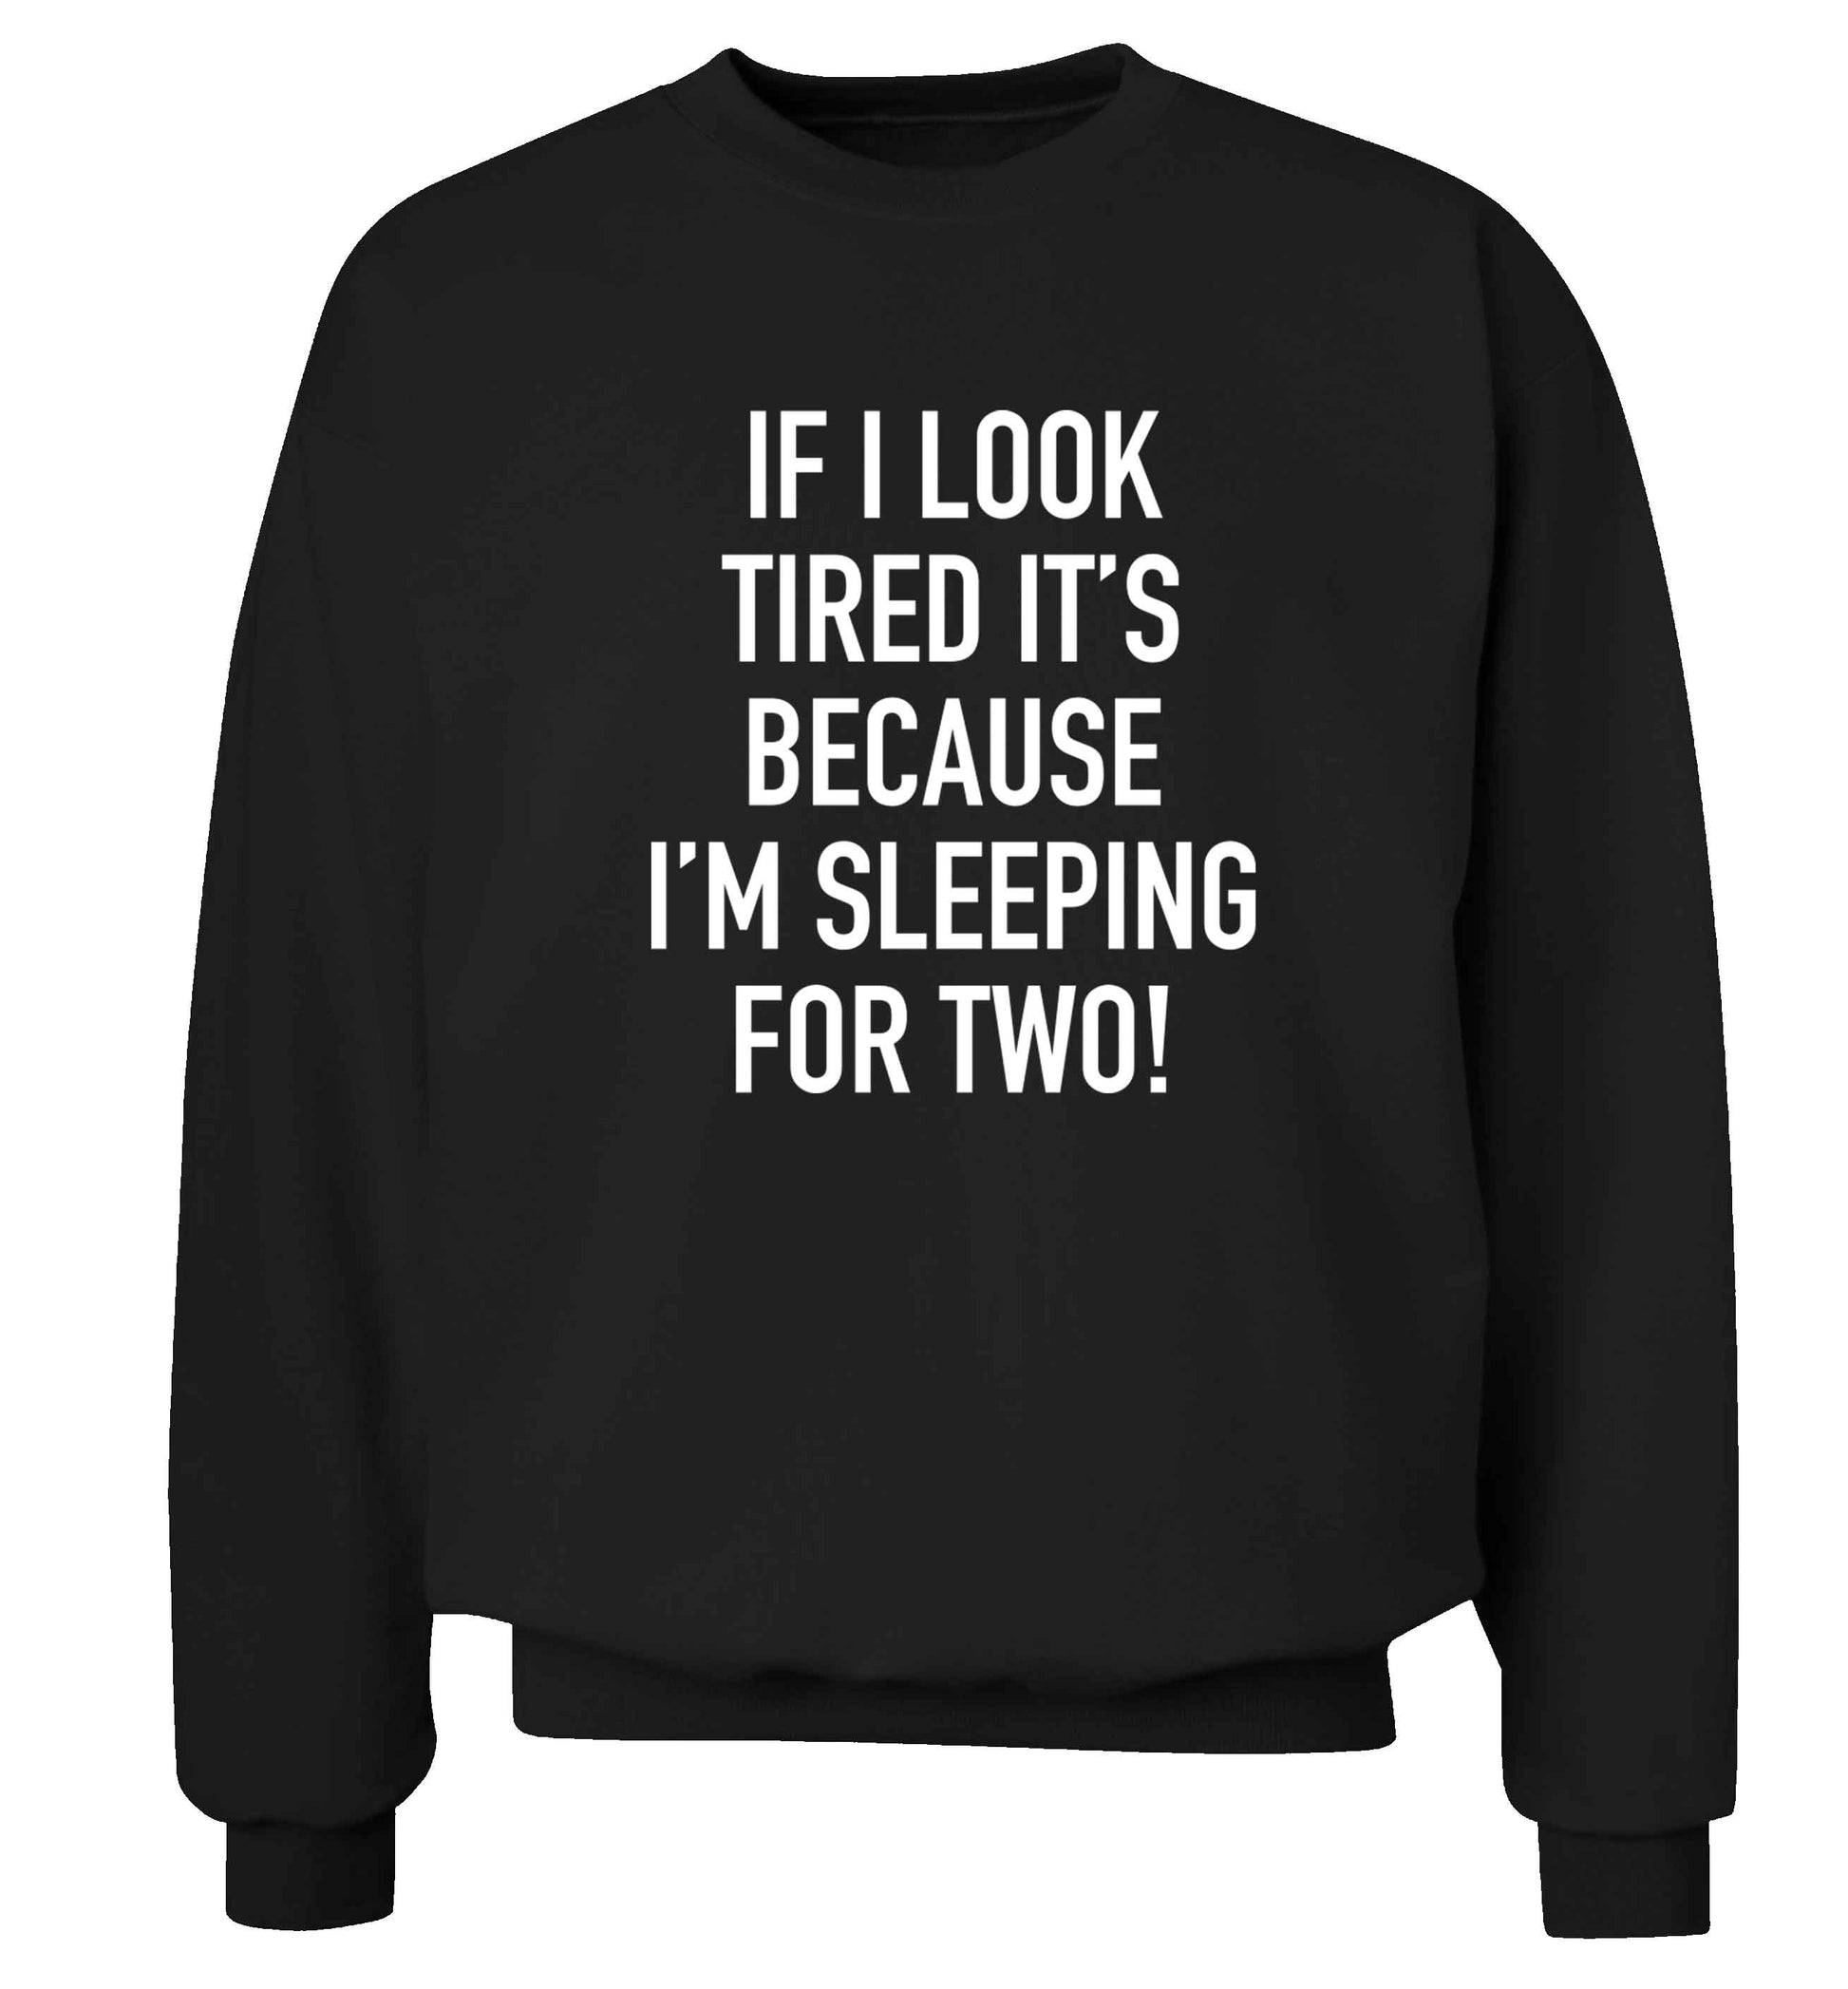 If I look tired it's because I'm sleeping for two Adult's unisex black Sweater 2XL